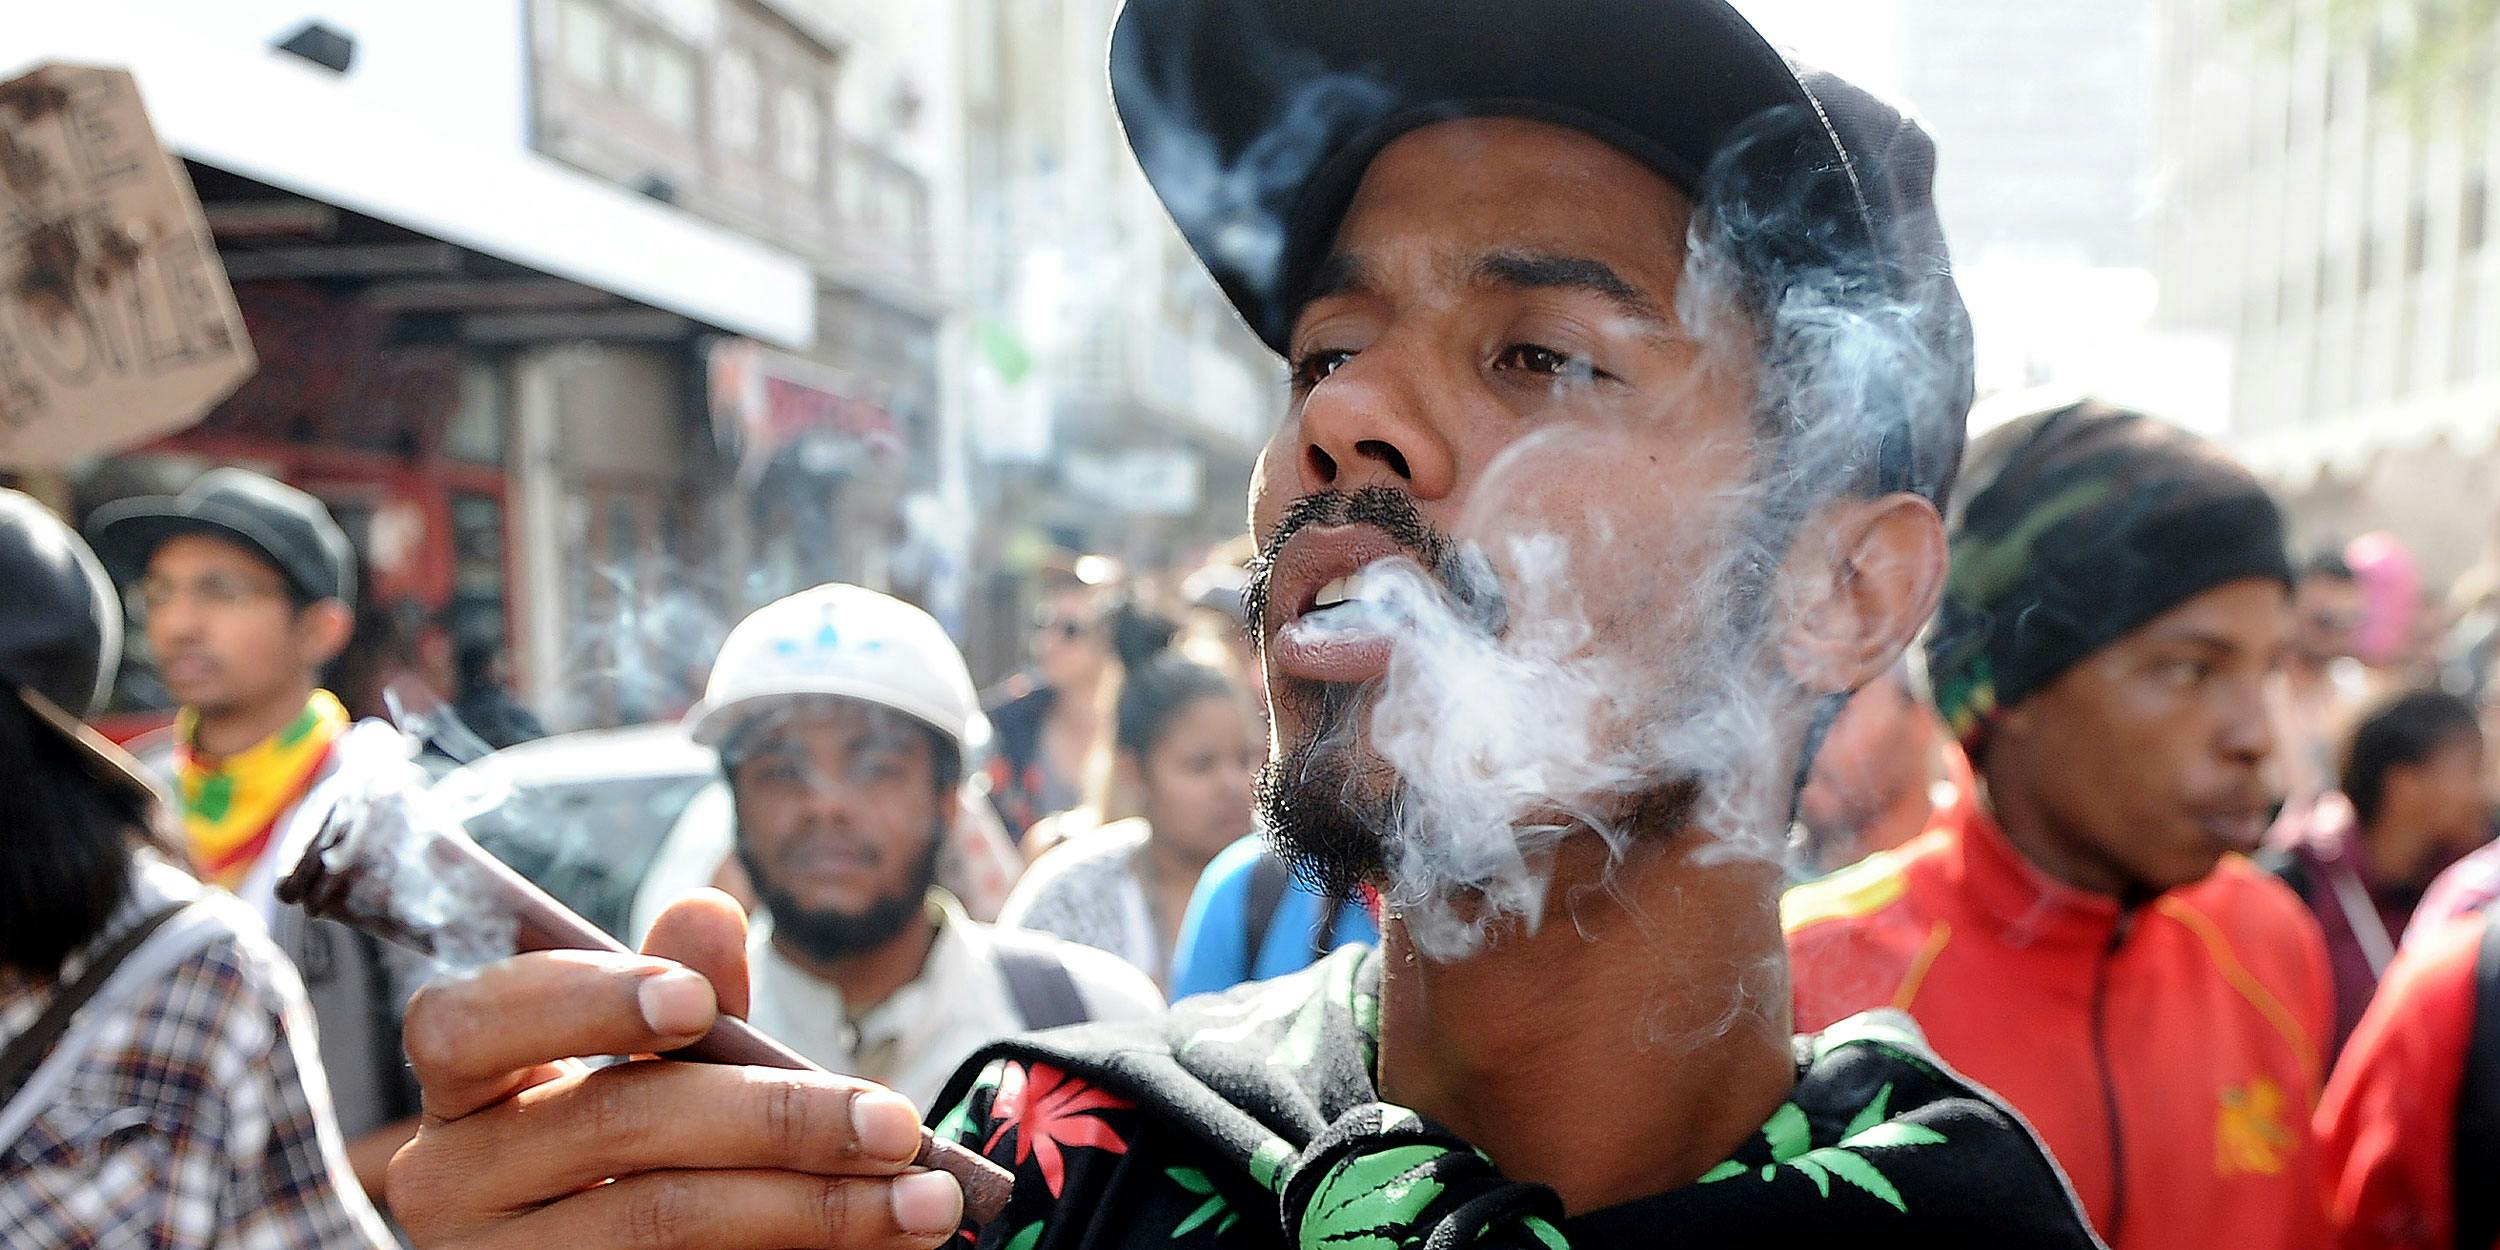 a man smokes marijuana during a marijuana march. Africa’s first medical marijuana dispensary is about to open in South Africa.